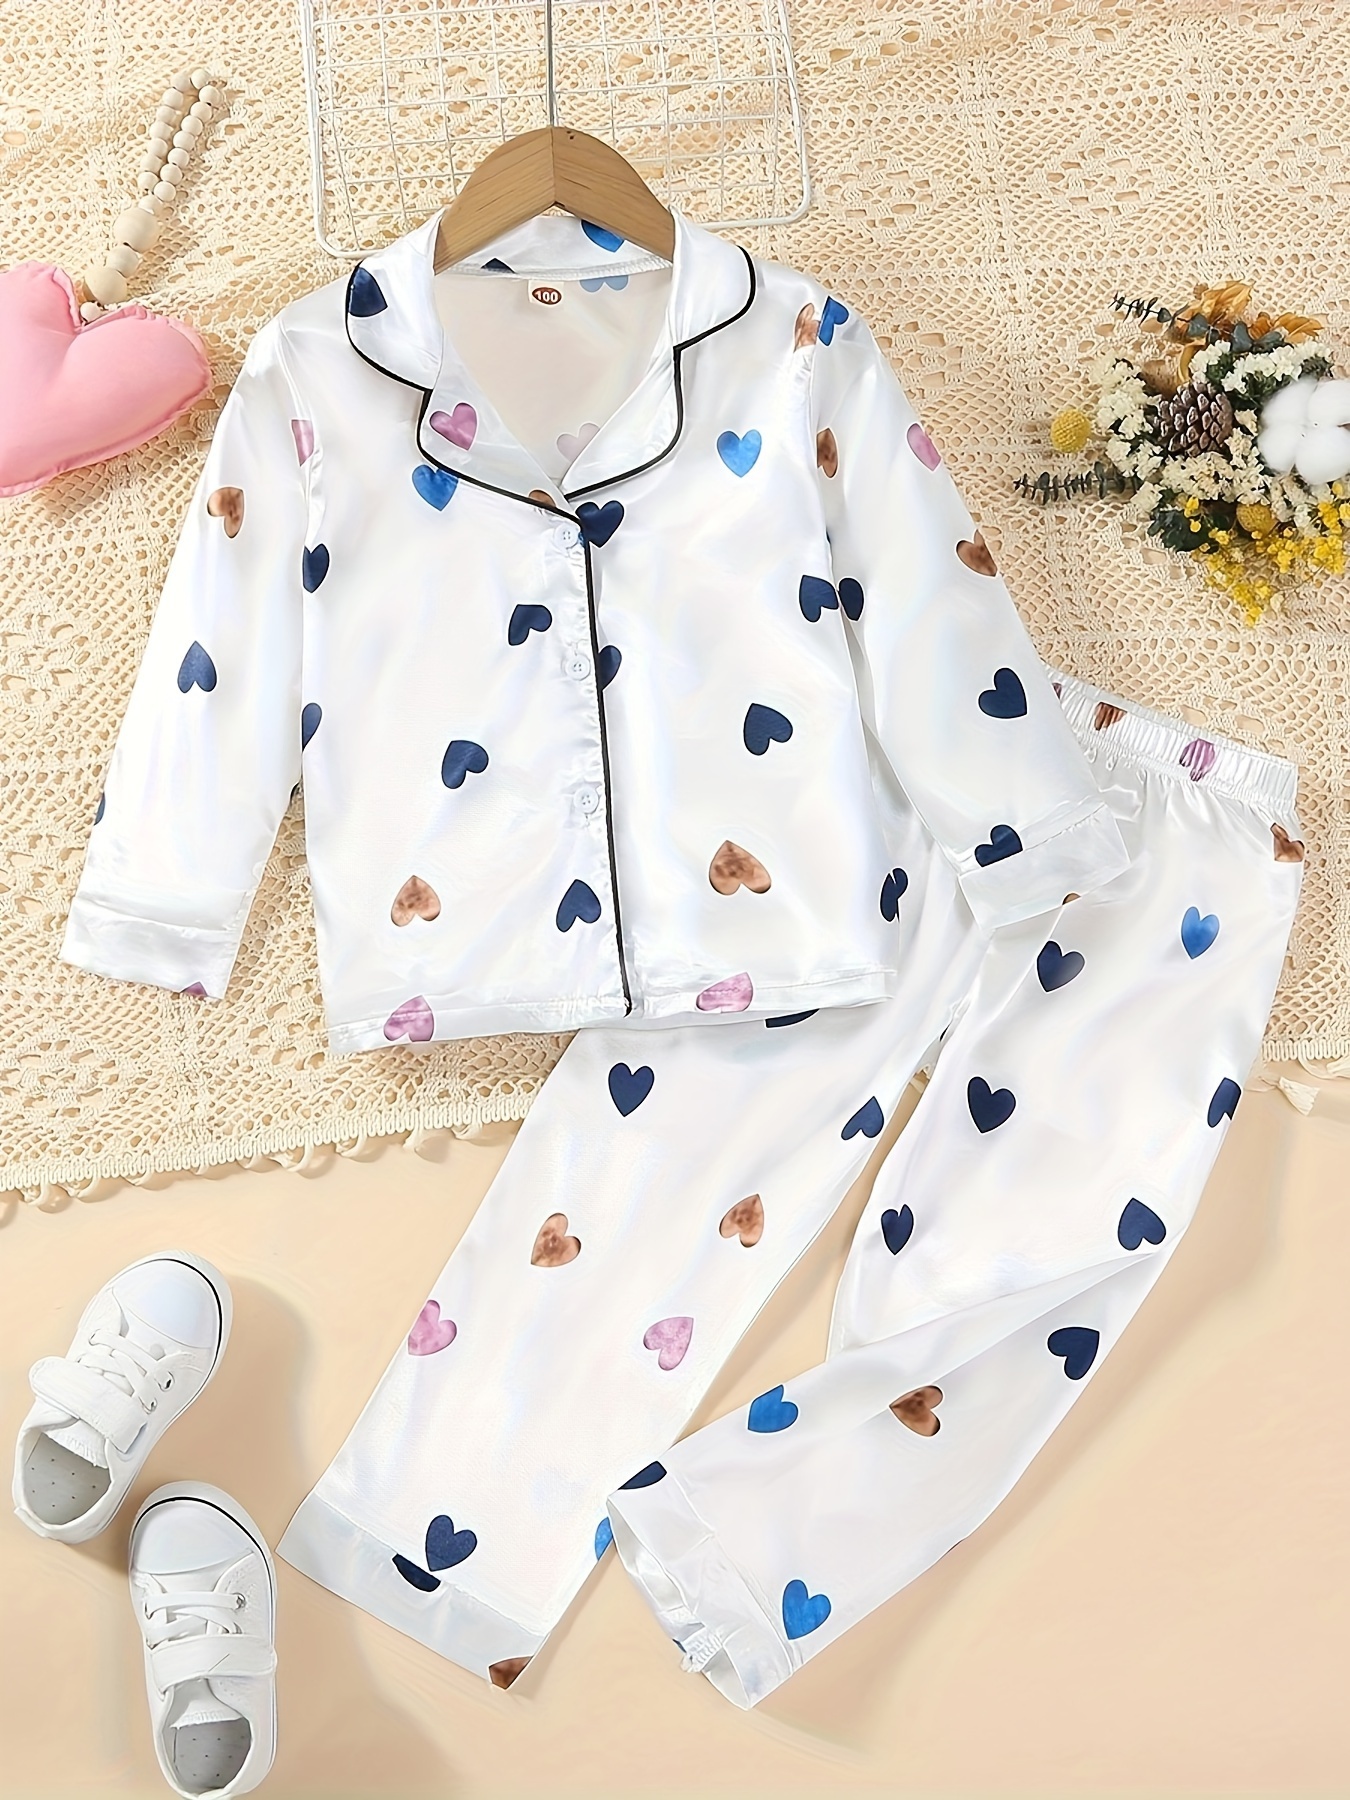 Girls Cute Full Heart Pattern Home Clothes Set, Cute Long Sleeve Tops +  Pants Comfy Two-piece Set